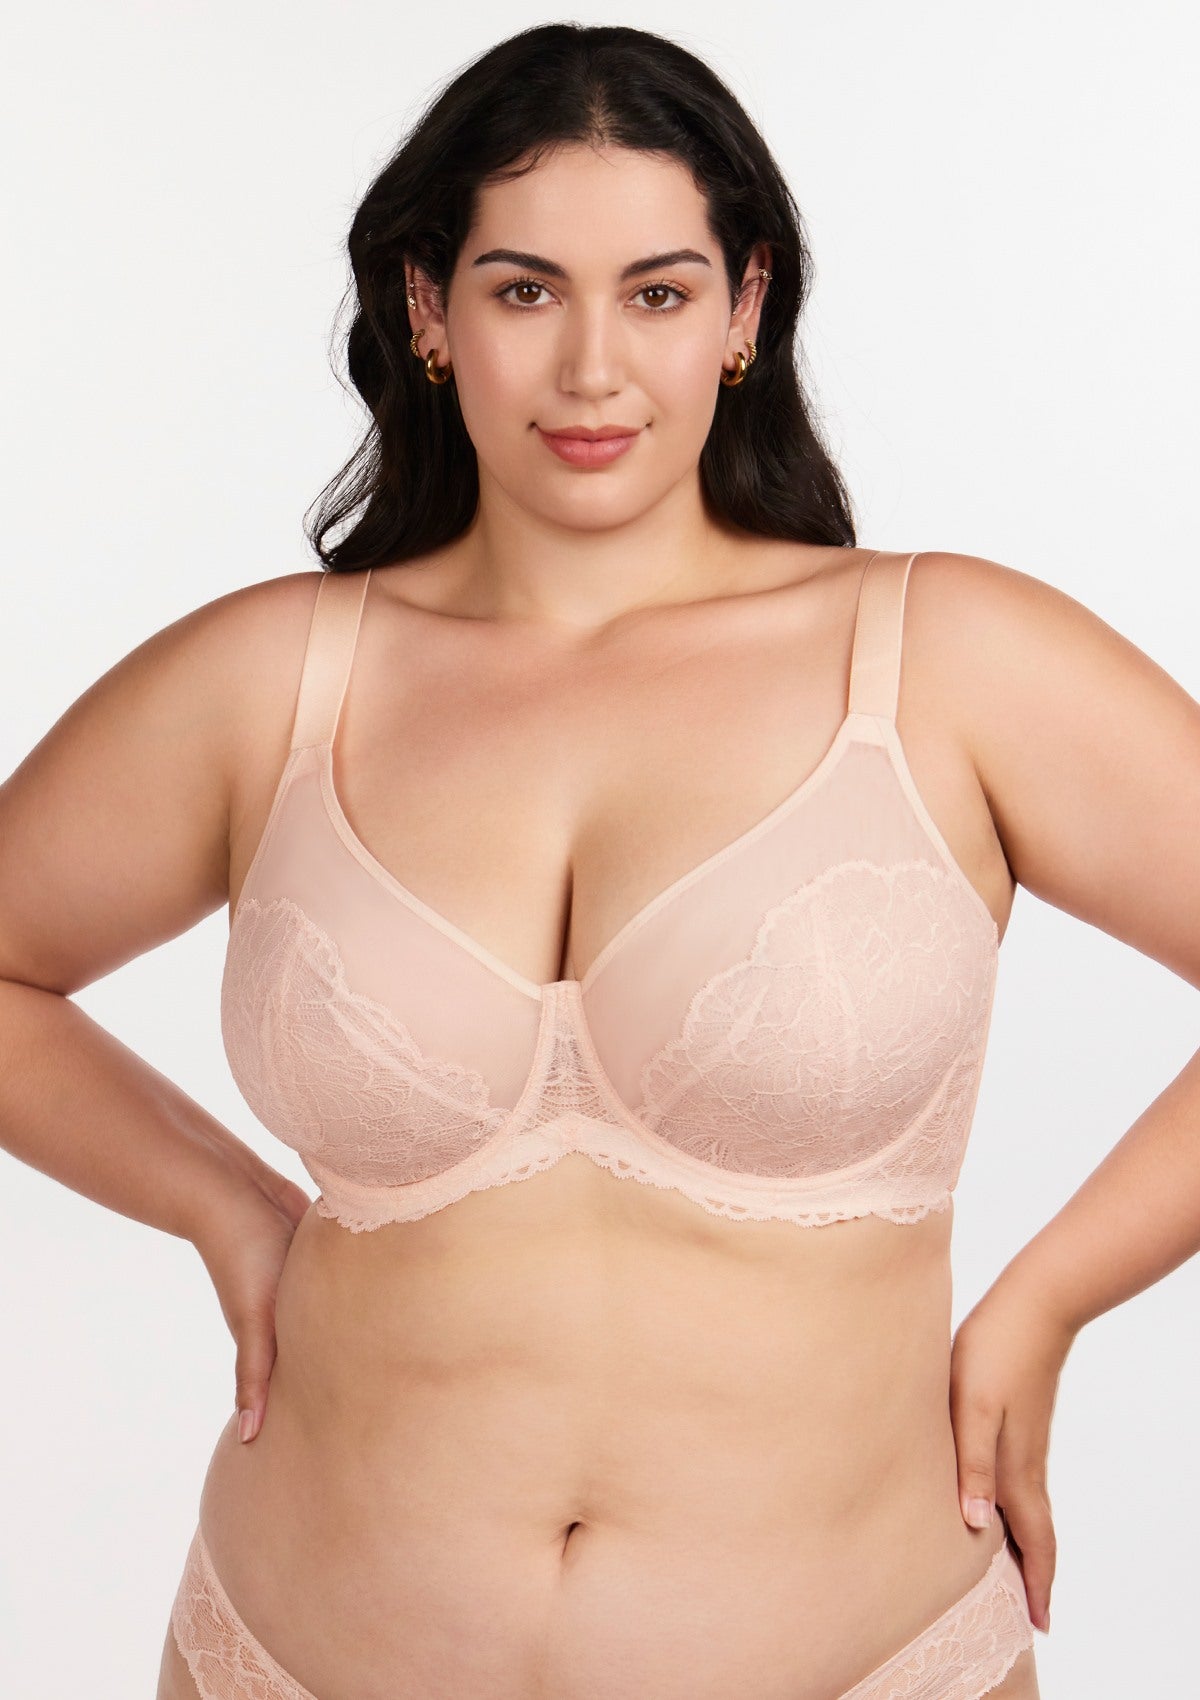 HSIA Blossom Sheer Lace Bra: Comfortable Underwire Bra For Big Busts - Dusty Peach / 46 / C